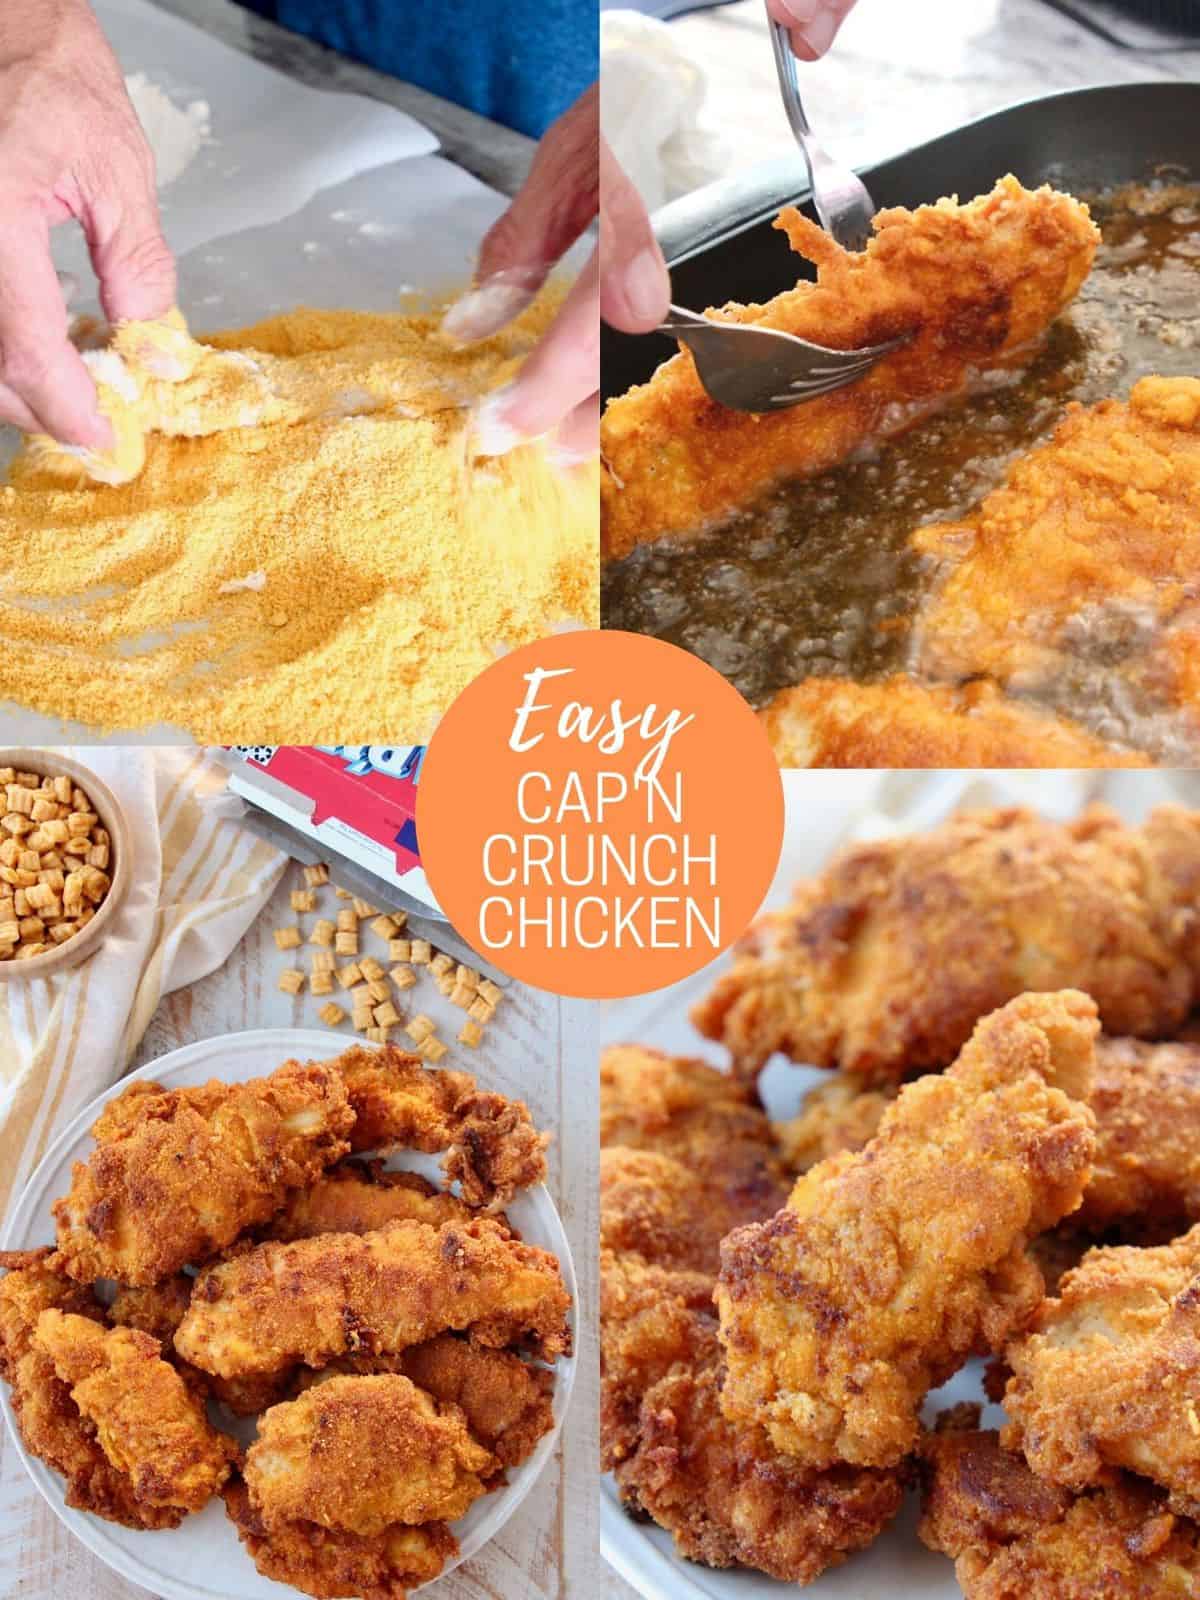 Dad's Famous Captain Crunch Fried Chicken Recipe - WhitneyBond.com